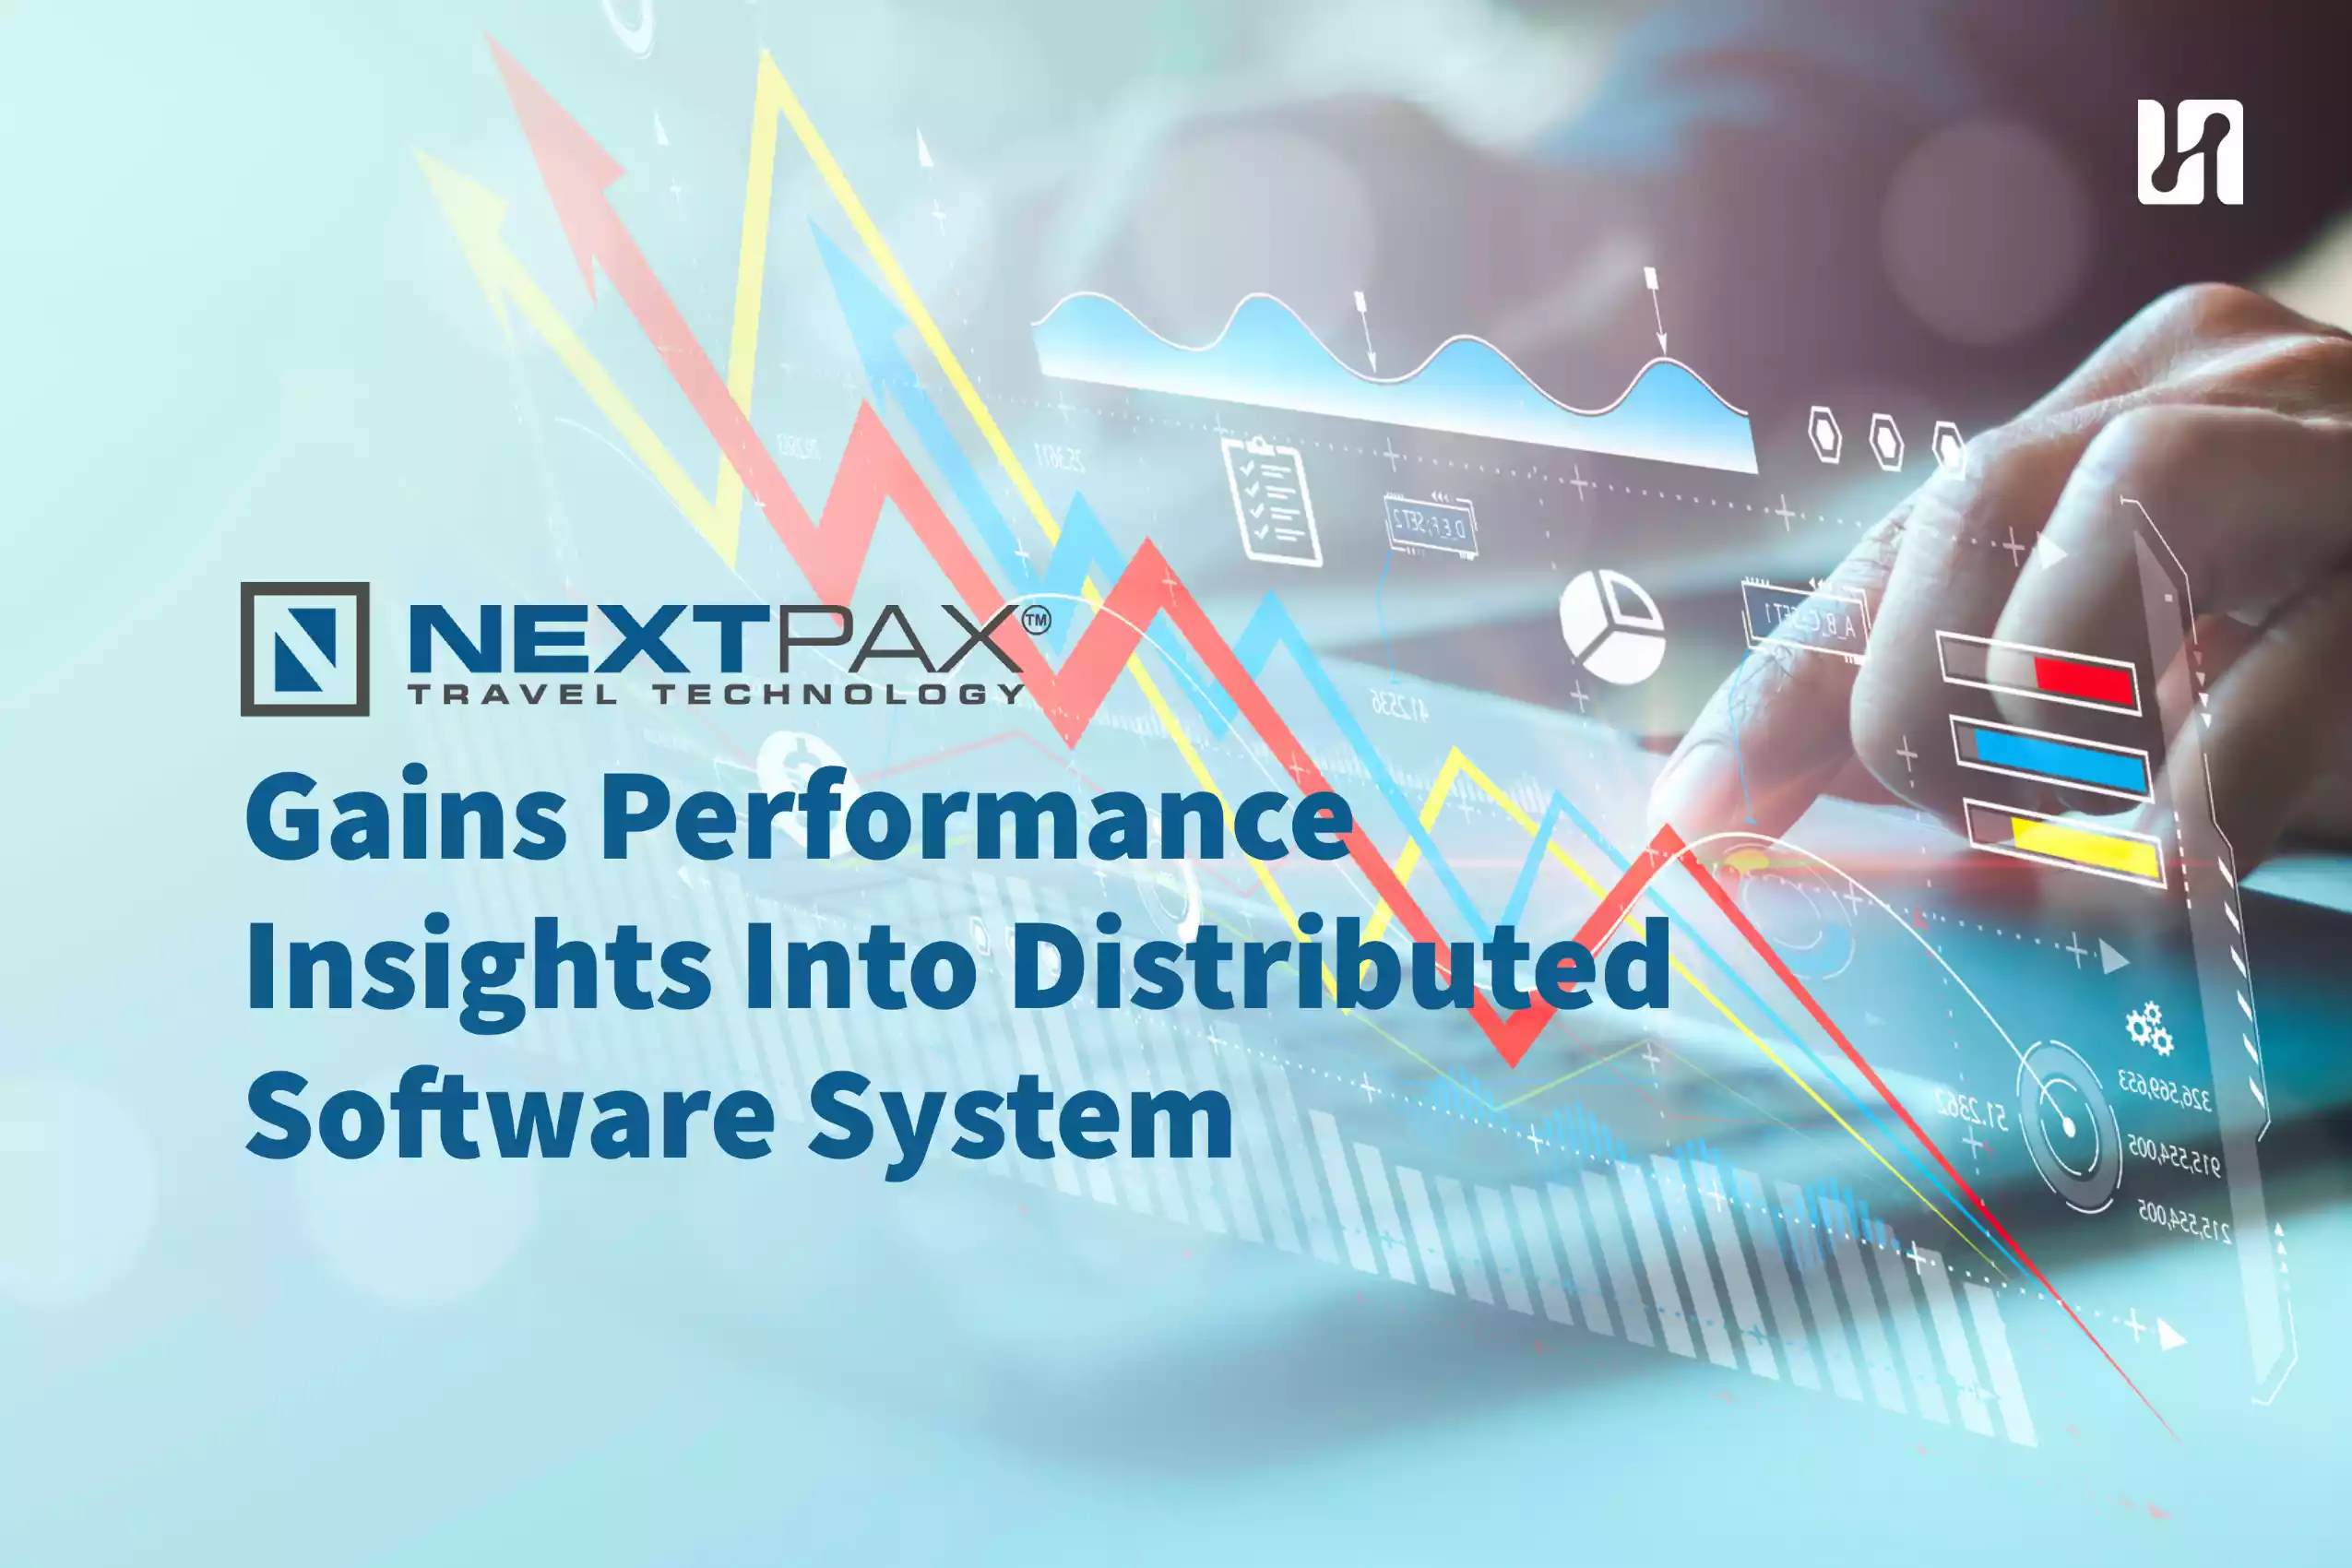 NextPax gains performance insights into distributed system, shown on an analytics overlay.